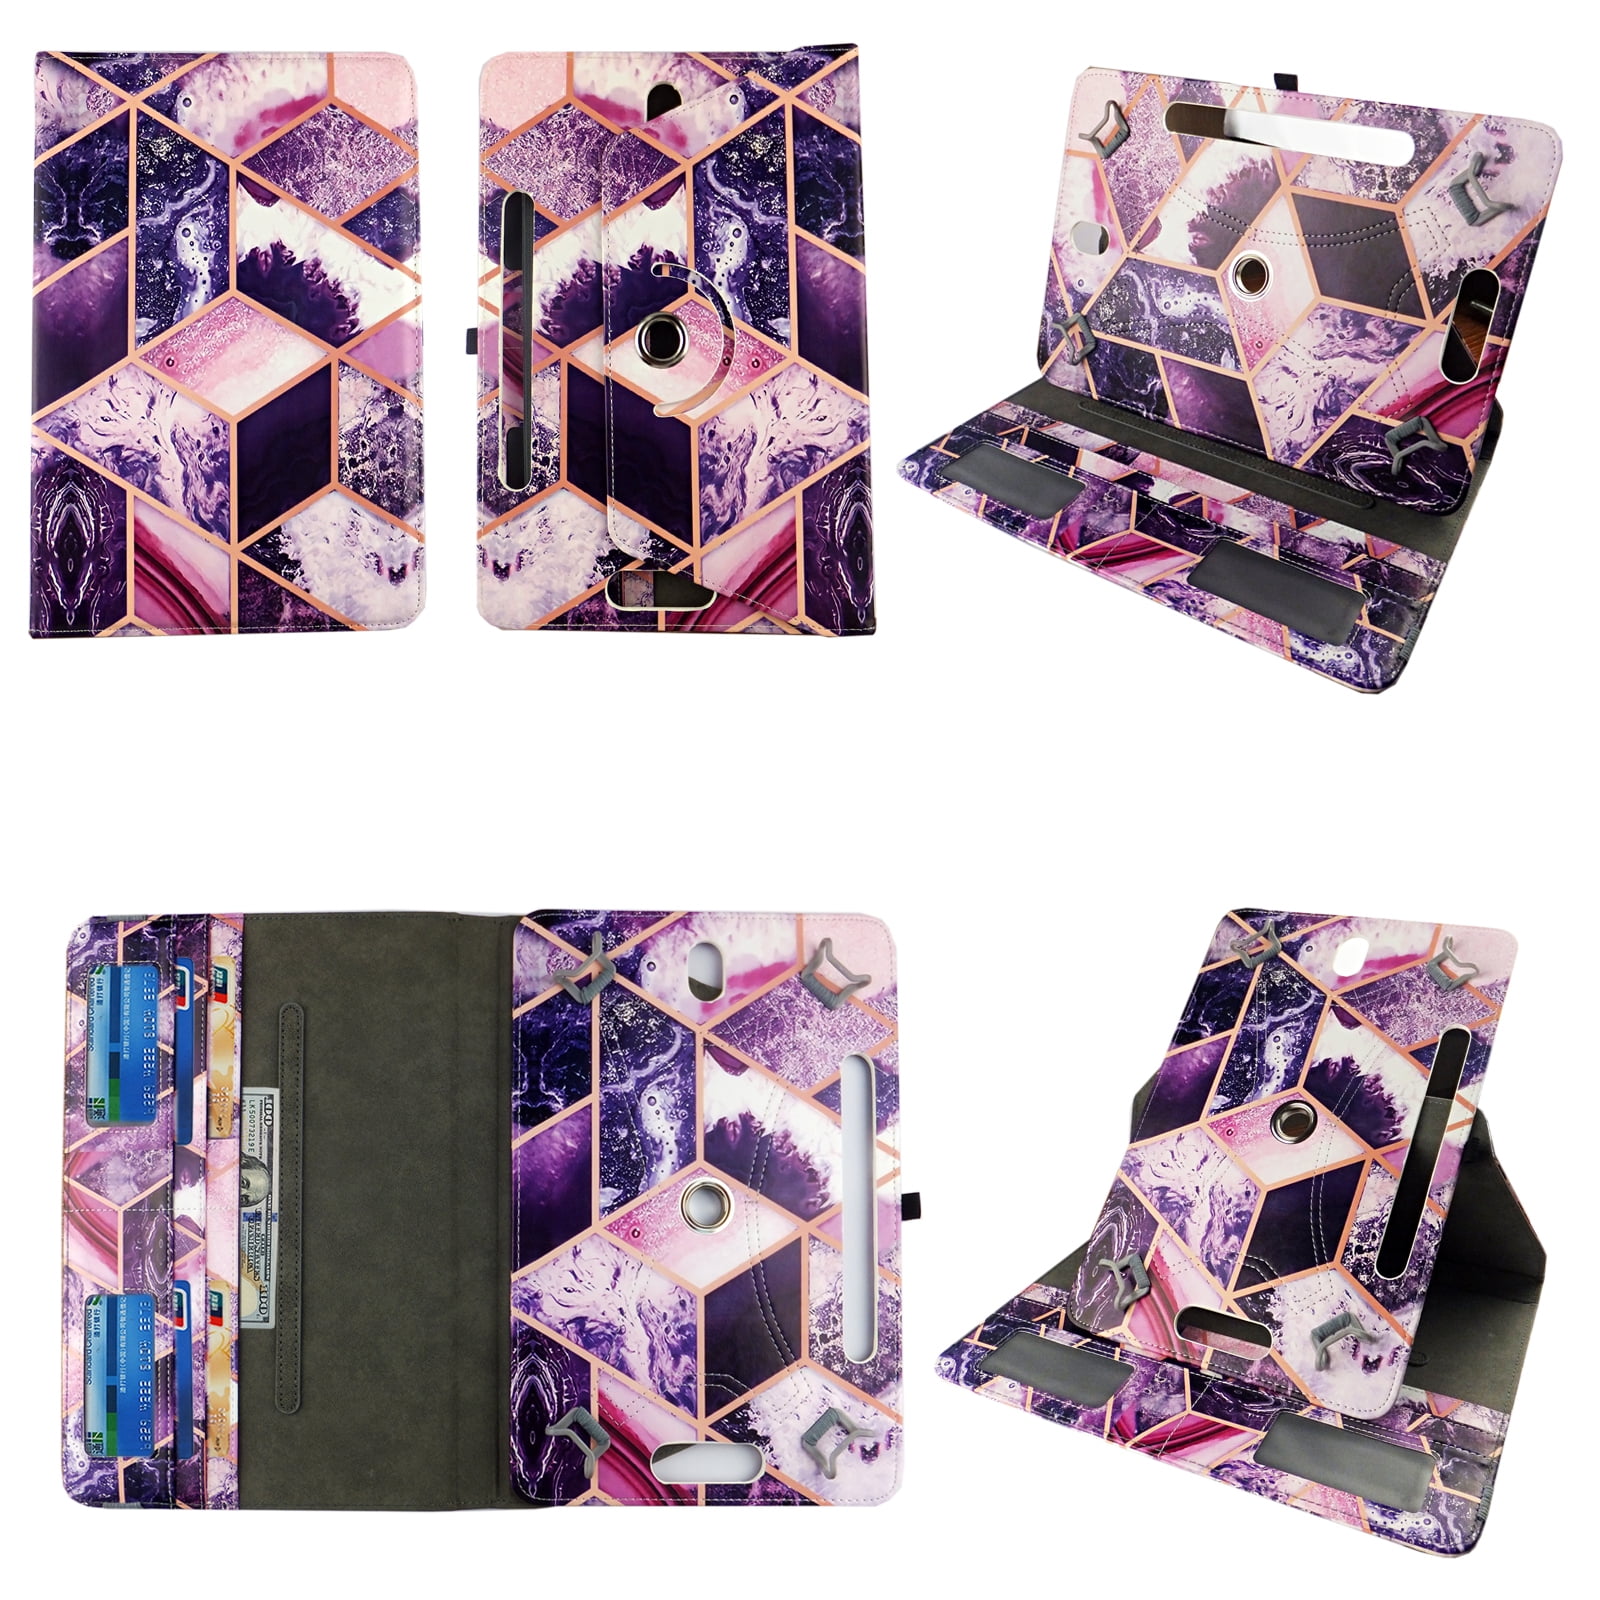 Purple Marble tablet case 8 inch for Ellipsis 8